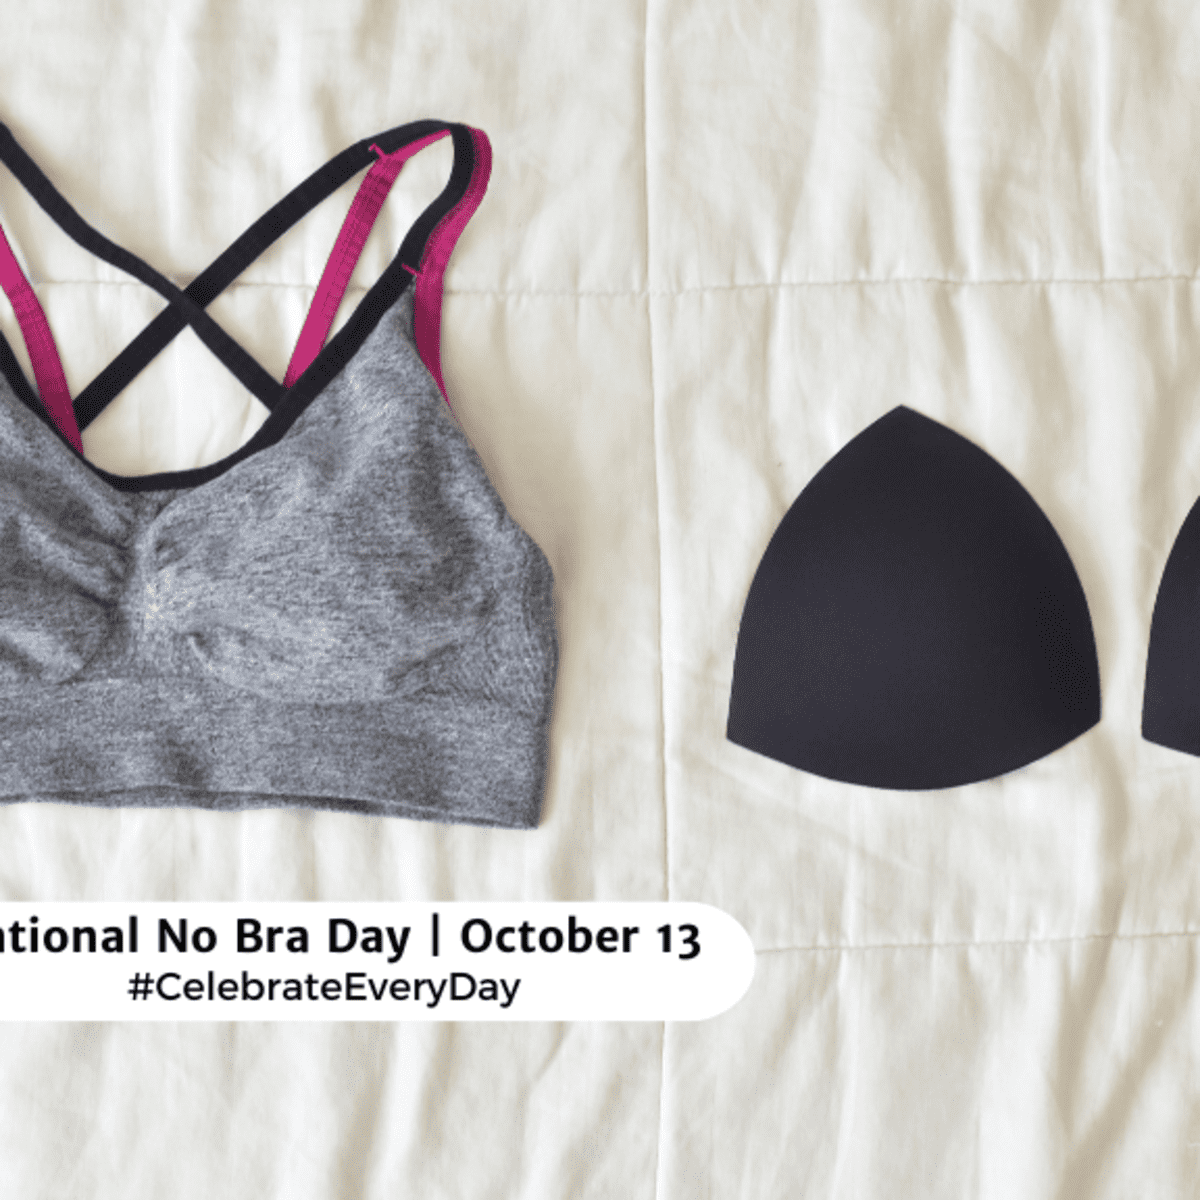 No Bra Day: Here is what it's about